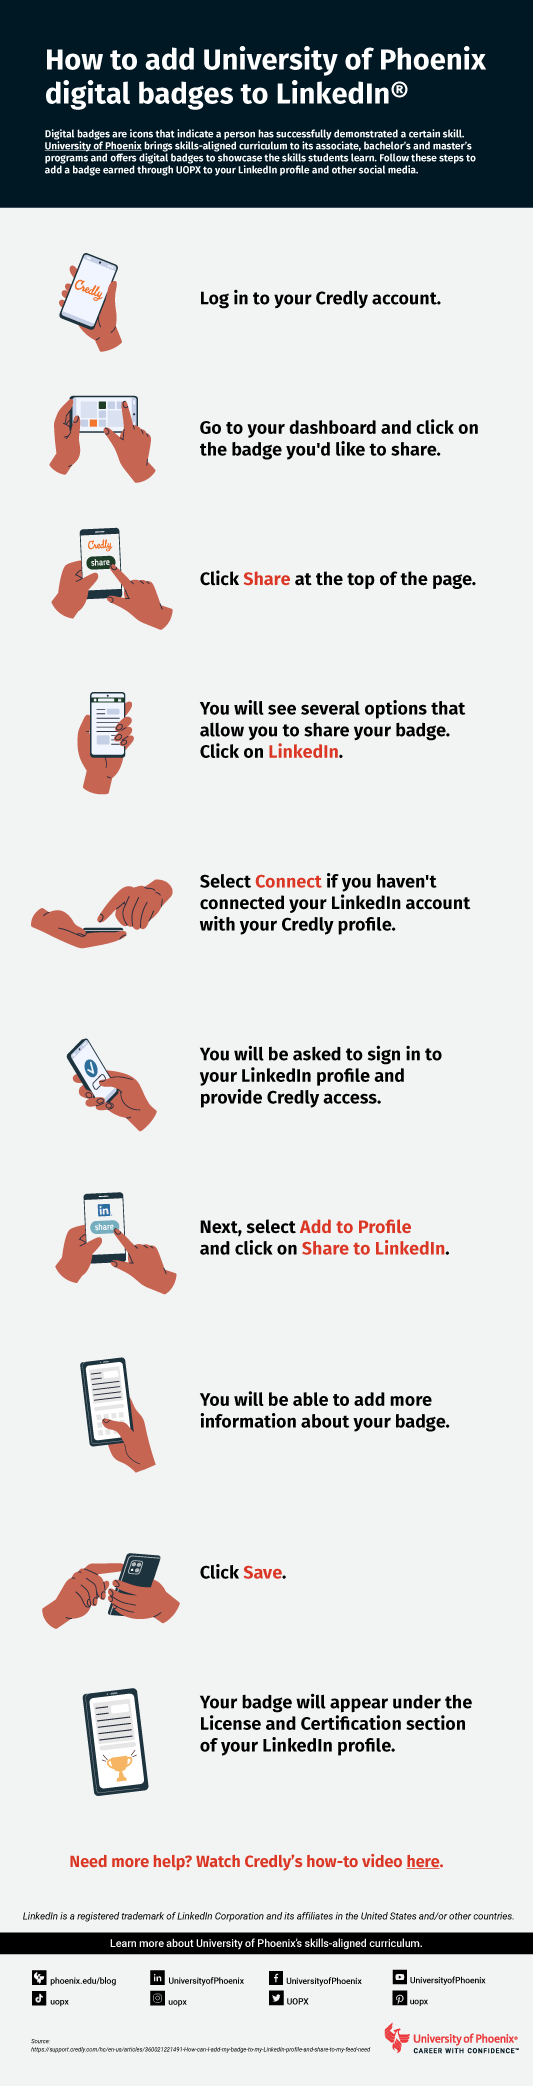 Infographic showing how to add digital badges to LinkedIn